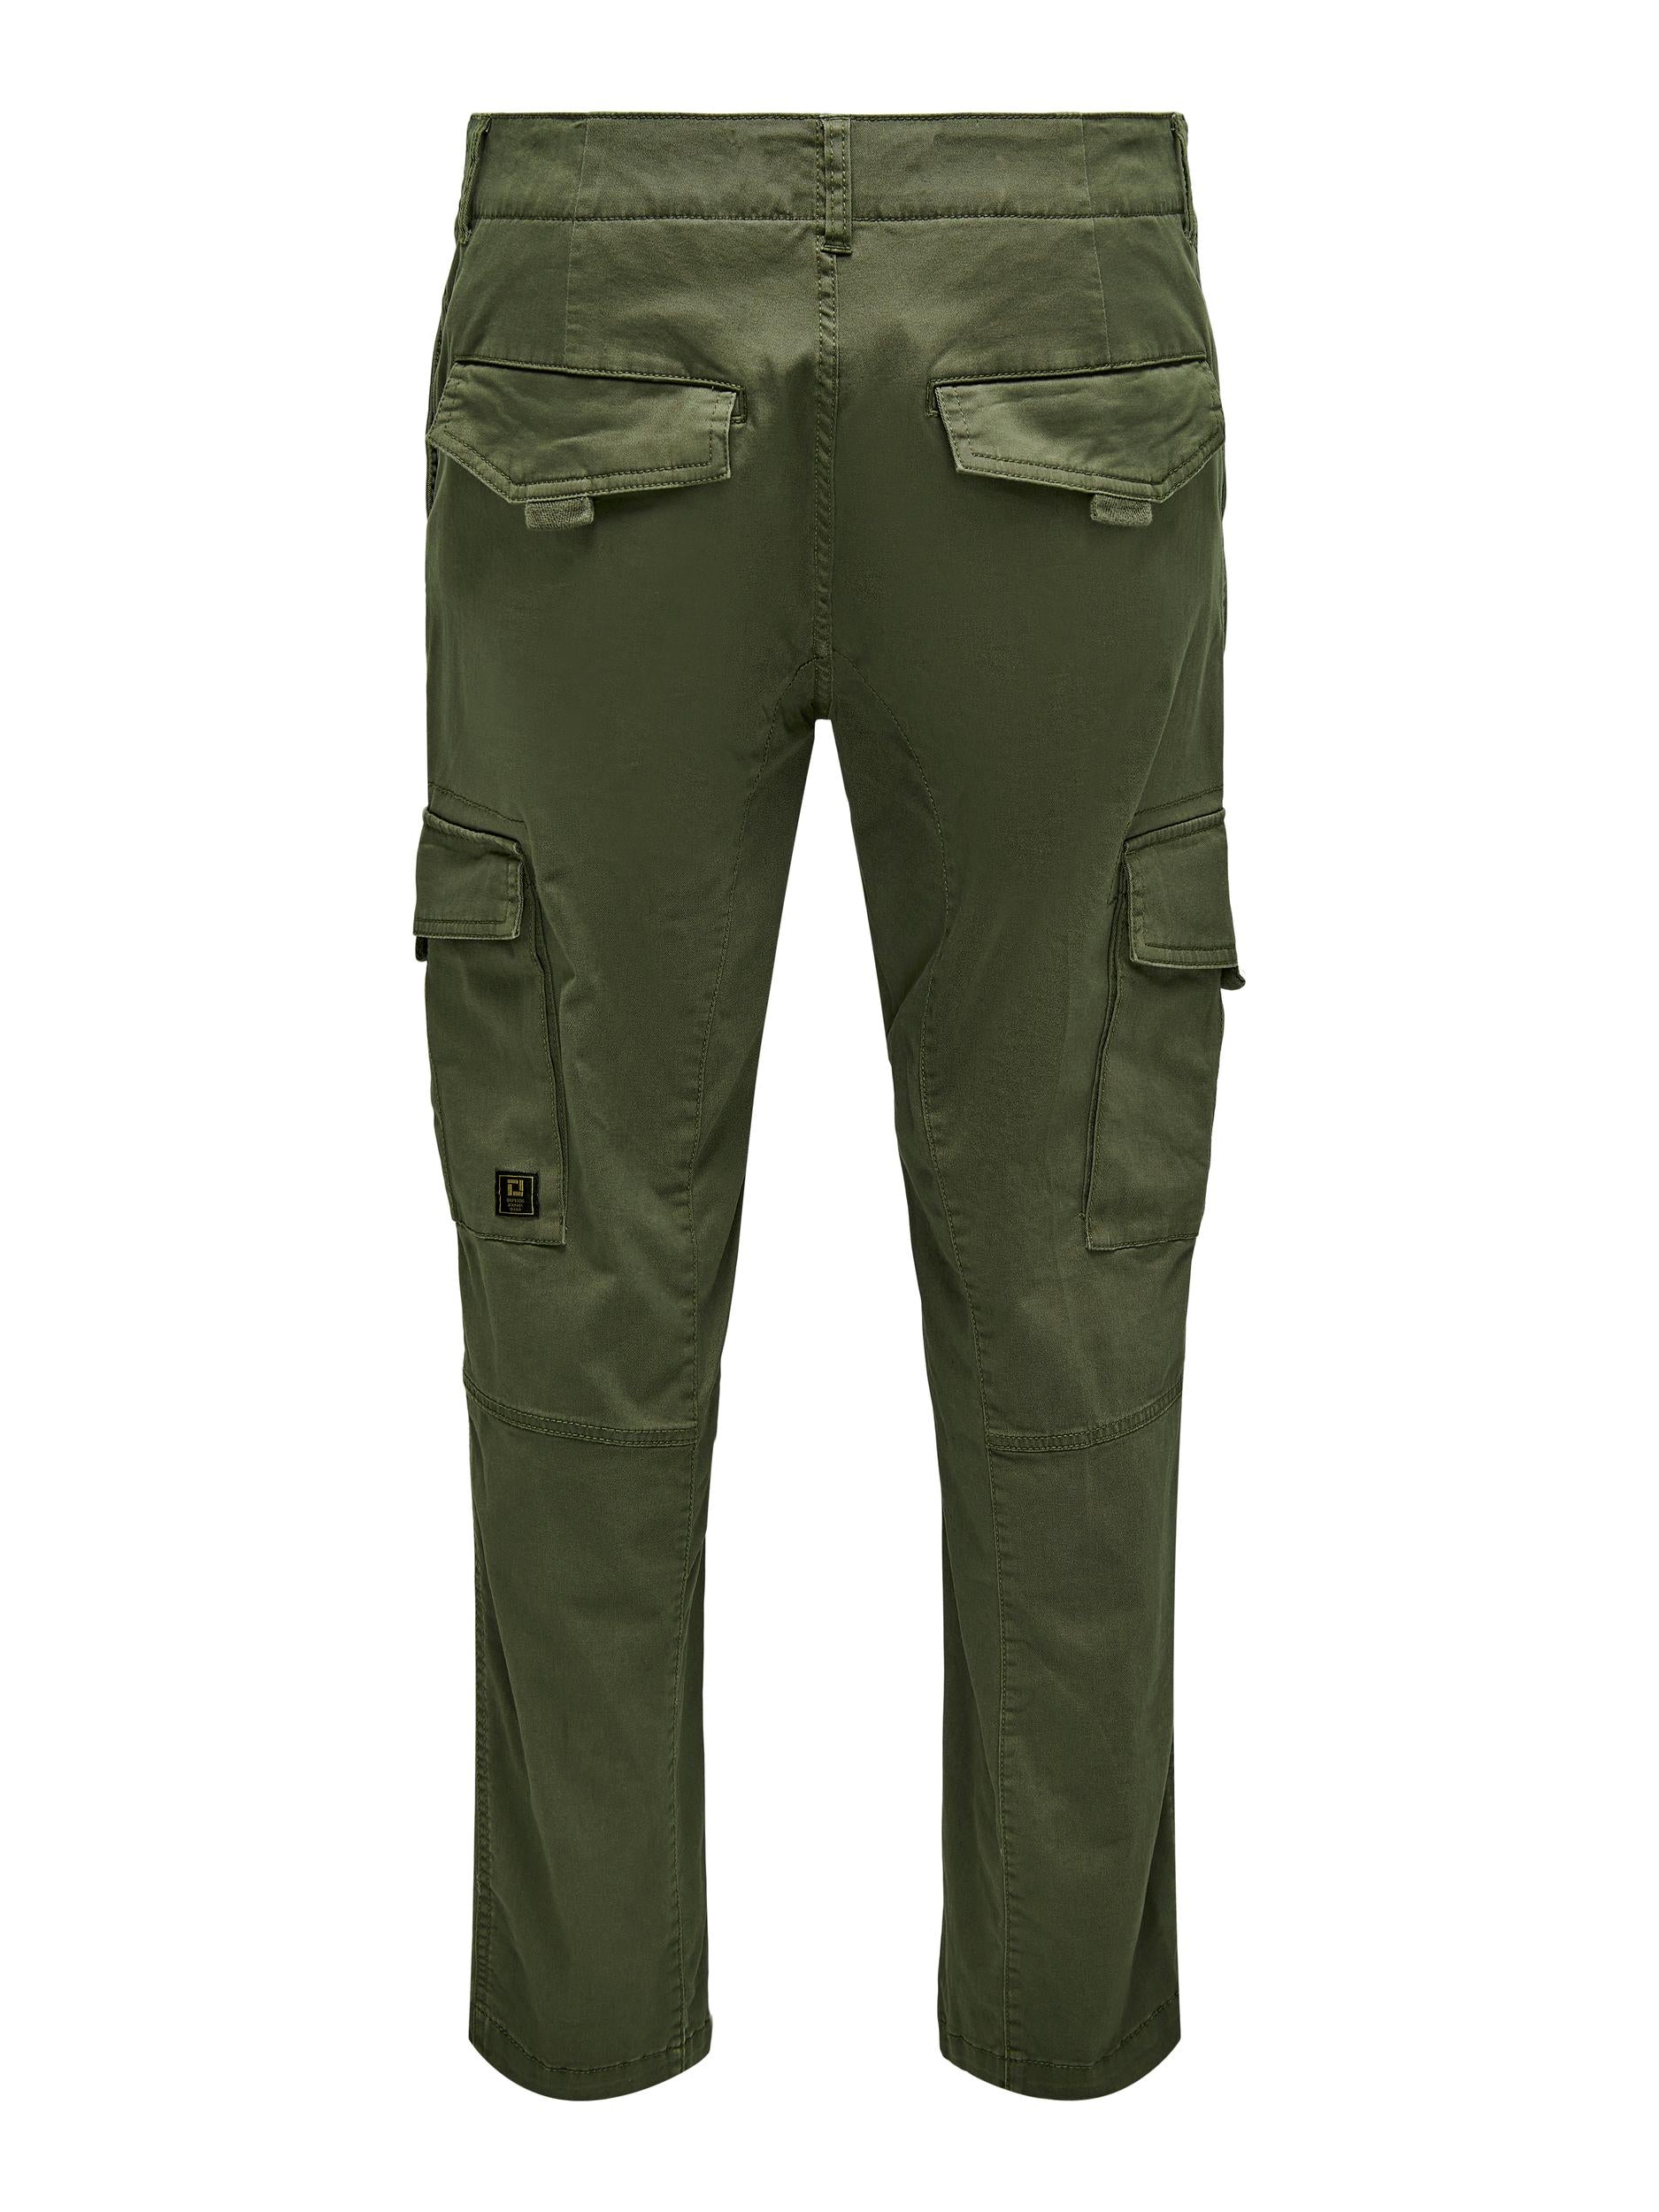 Dean Life Tap Cargo 0032 Pant - Olive Night